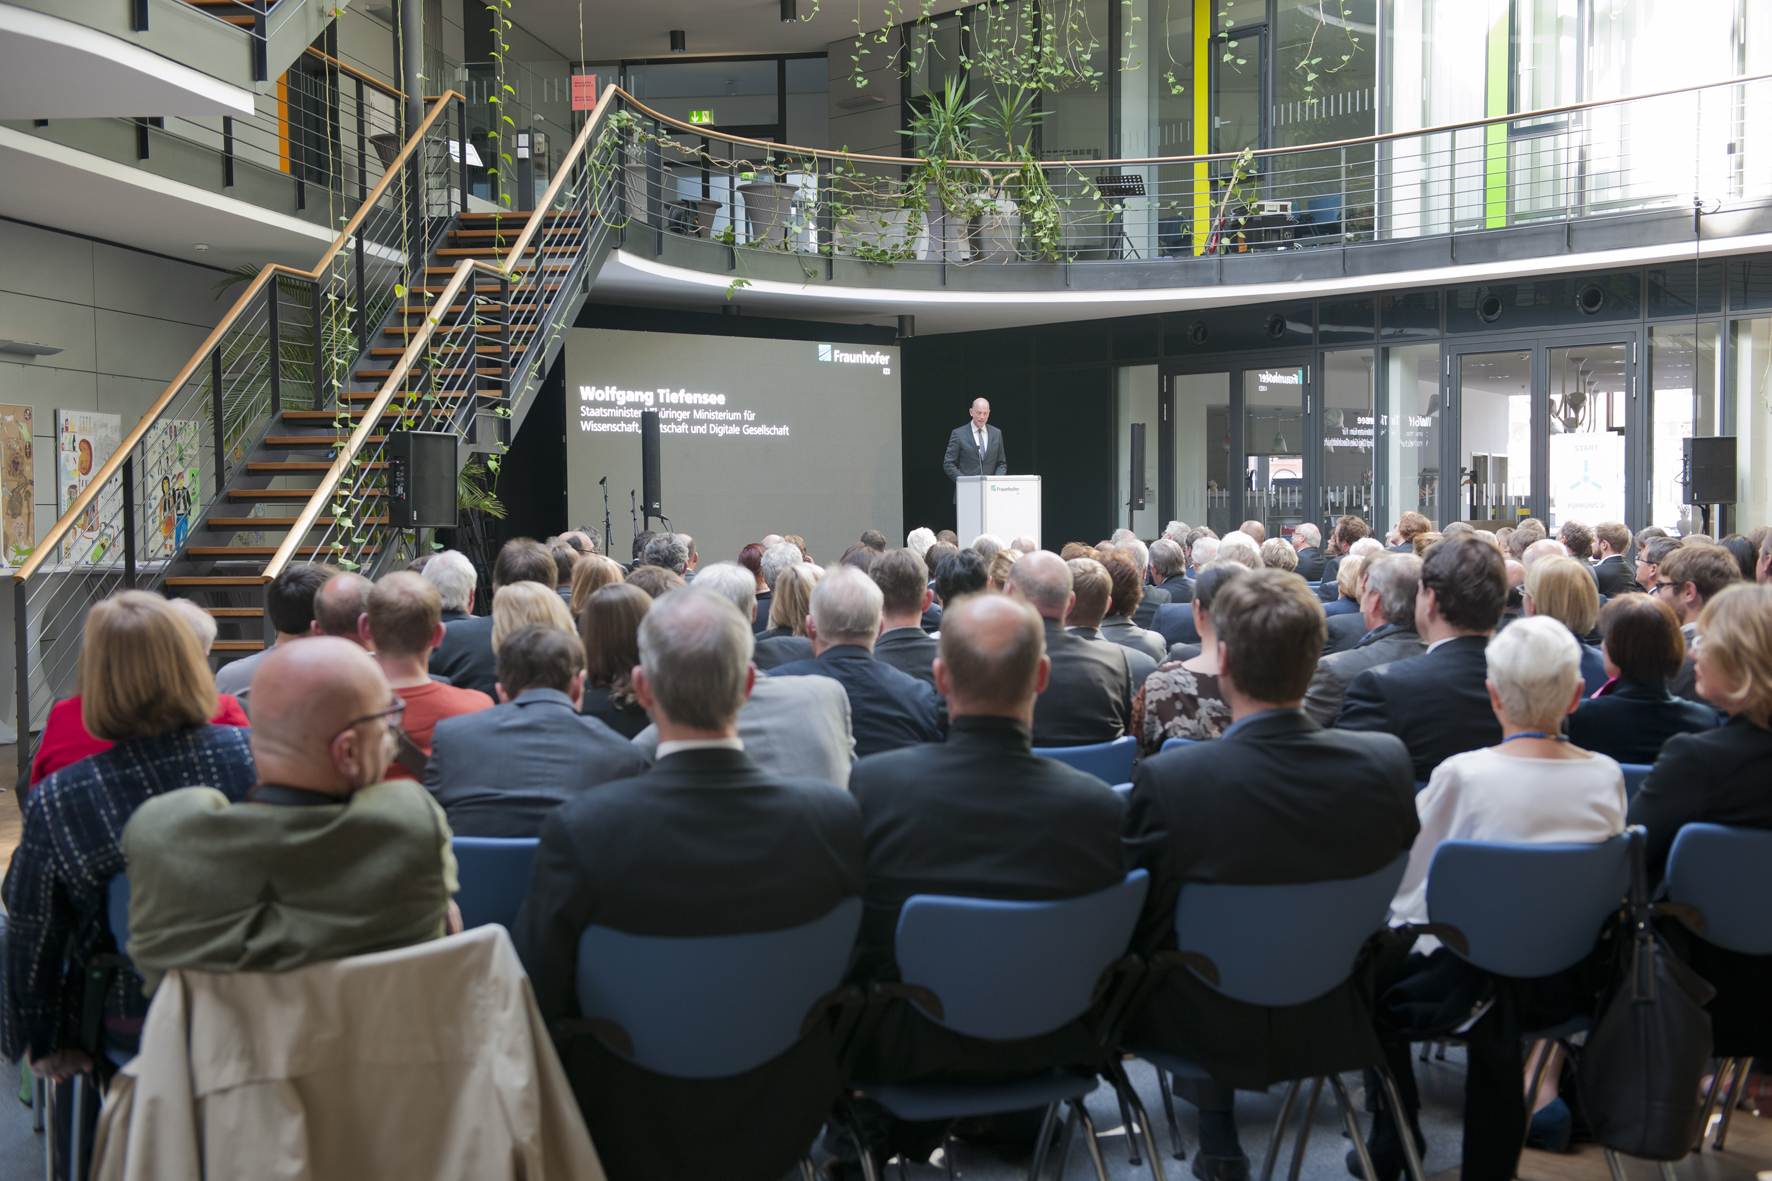 Over 300 guests attended the ceremony in the atrium of the Fraunhofer IZI.